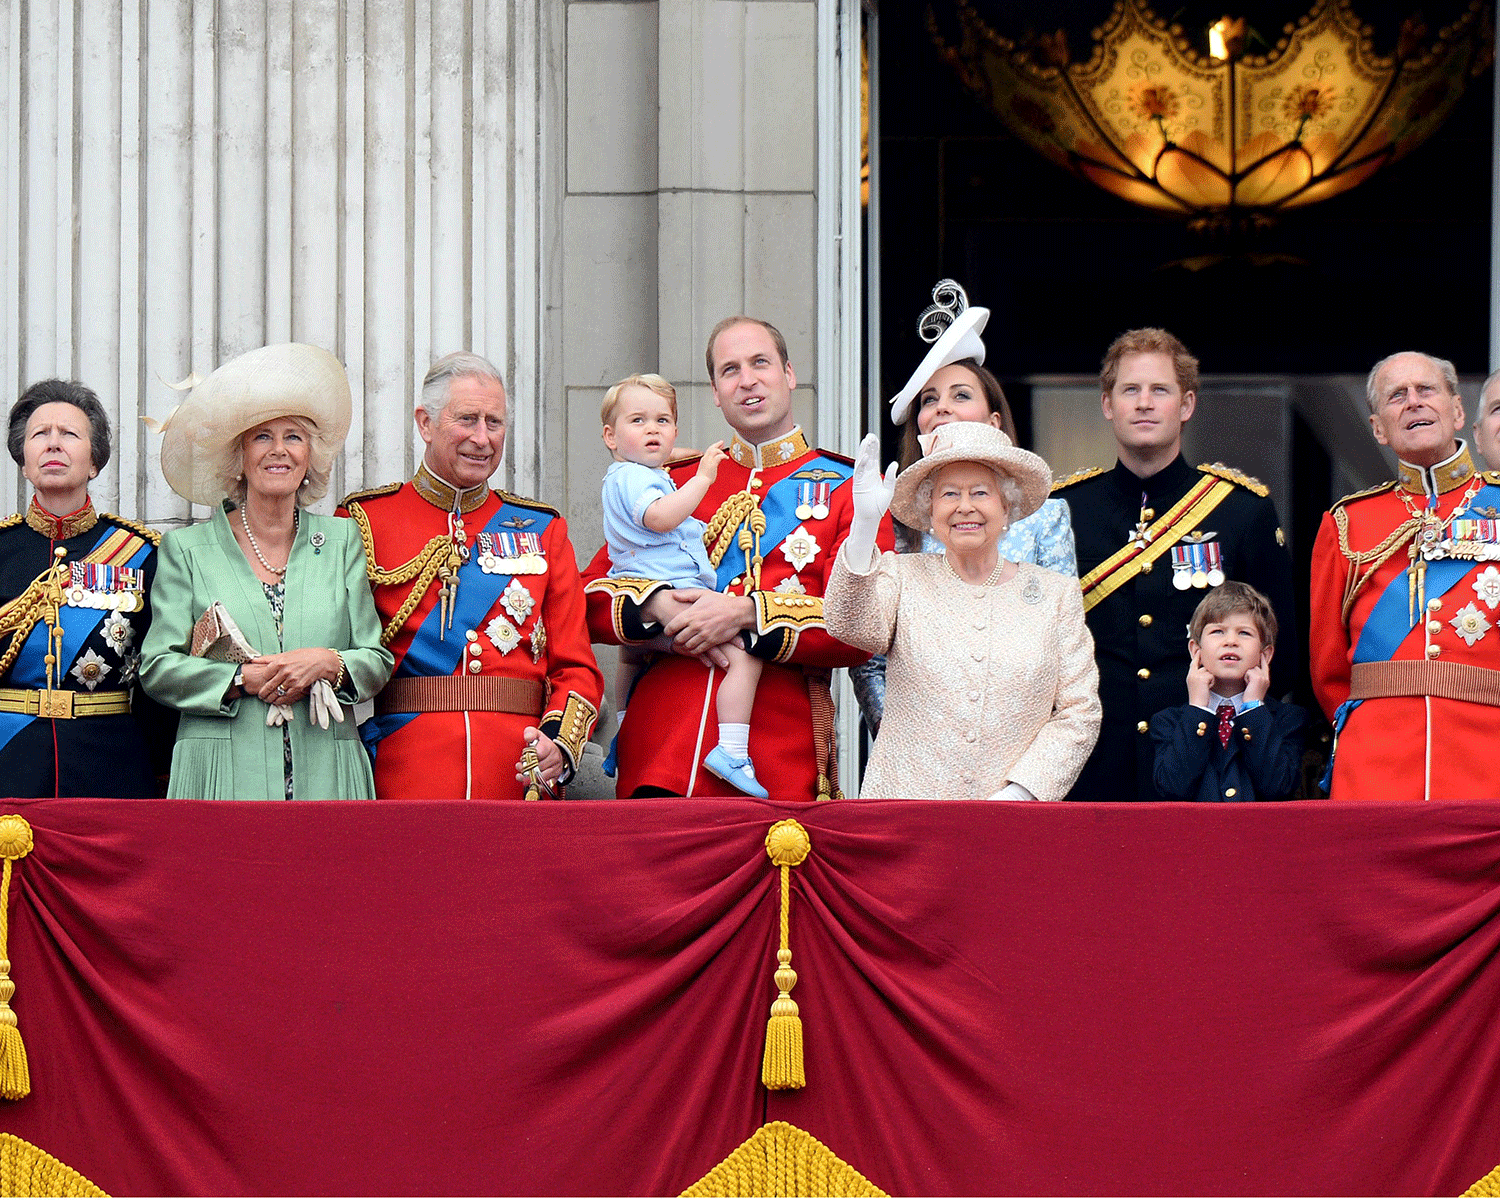 should the monarchy be abolished